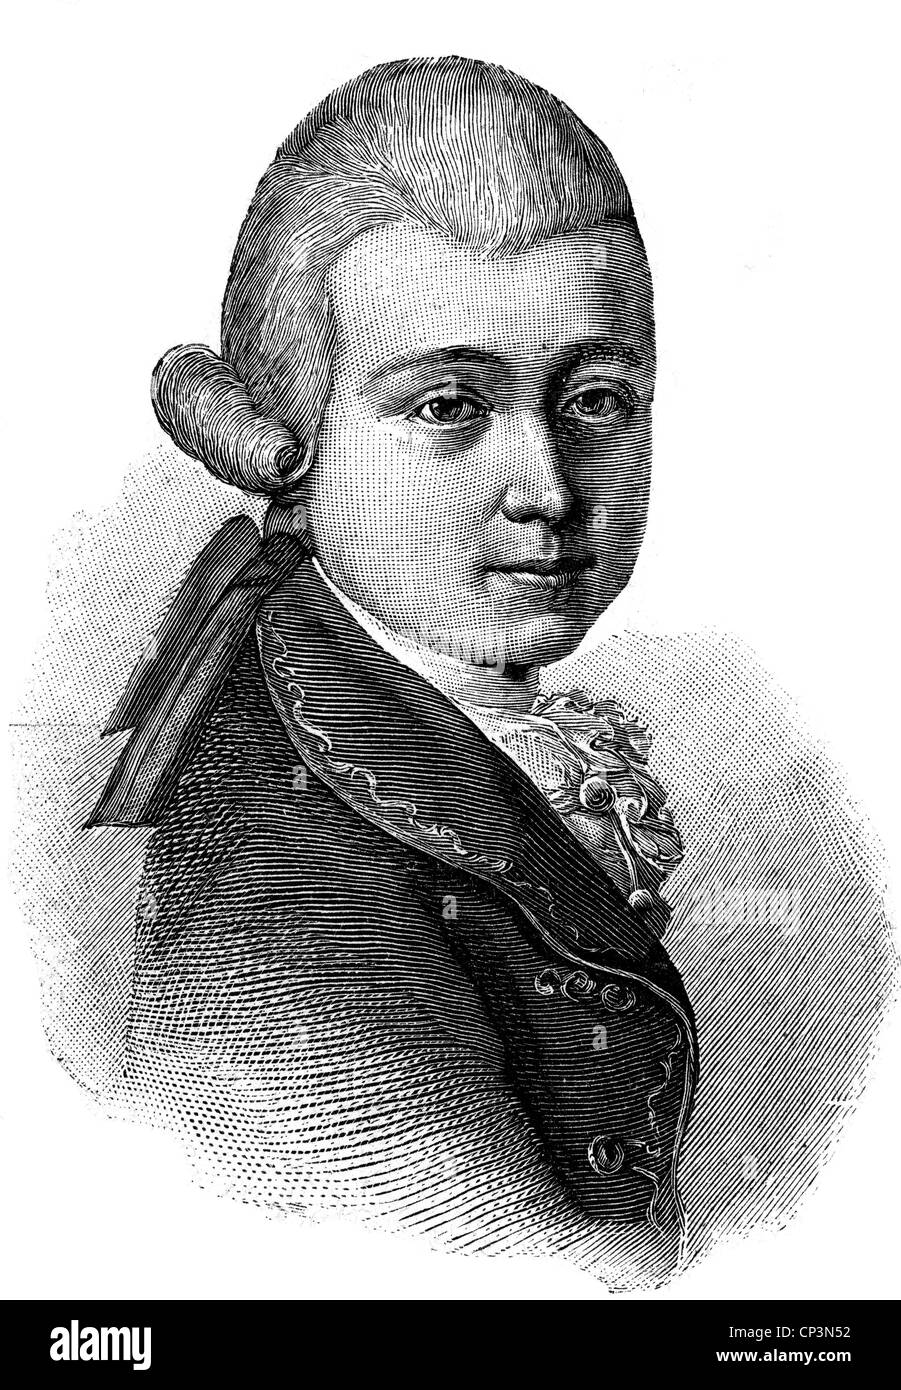 Mozart, Wolfgang Amadeus, 27.1.1756 - 5.12.1791, Austrian composer, portrait, as 13 year old boy, wood engraving, 19th century, Stock Photo